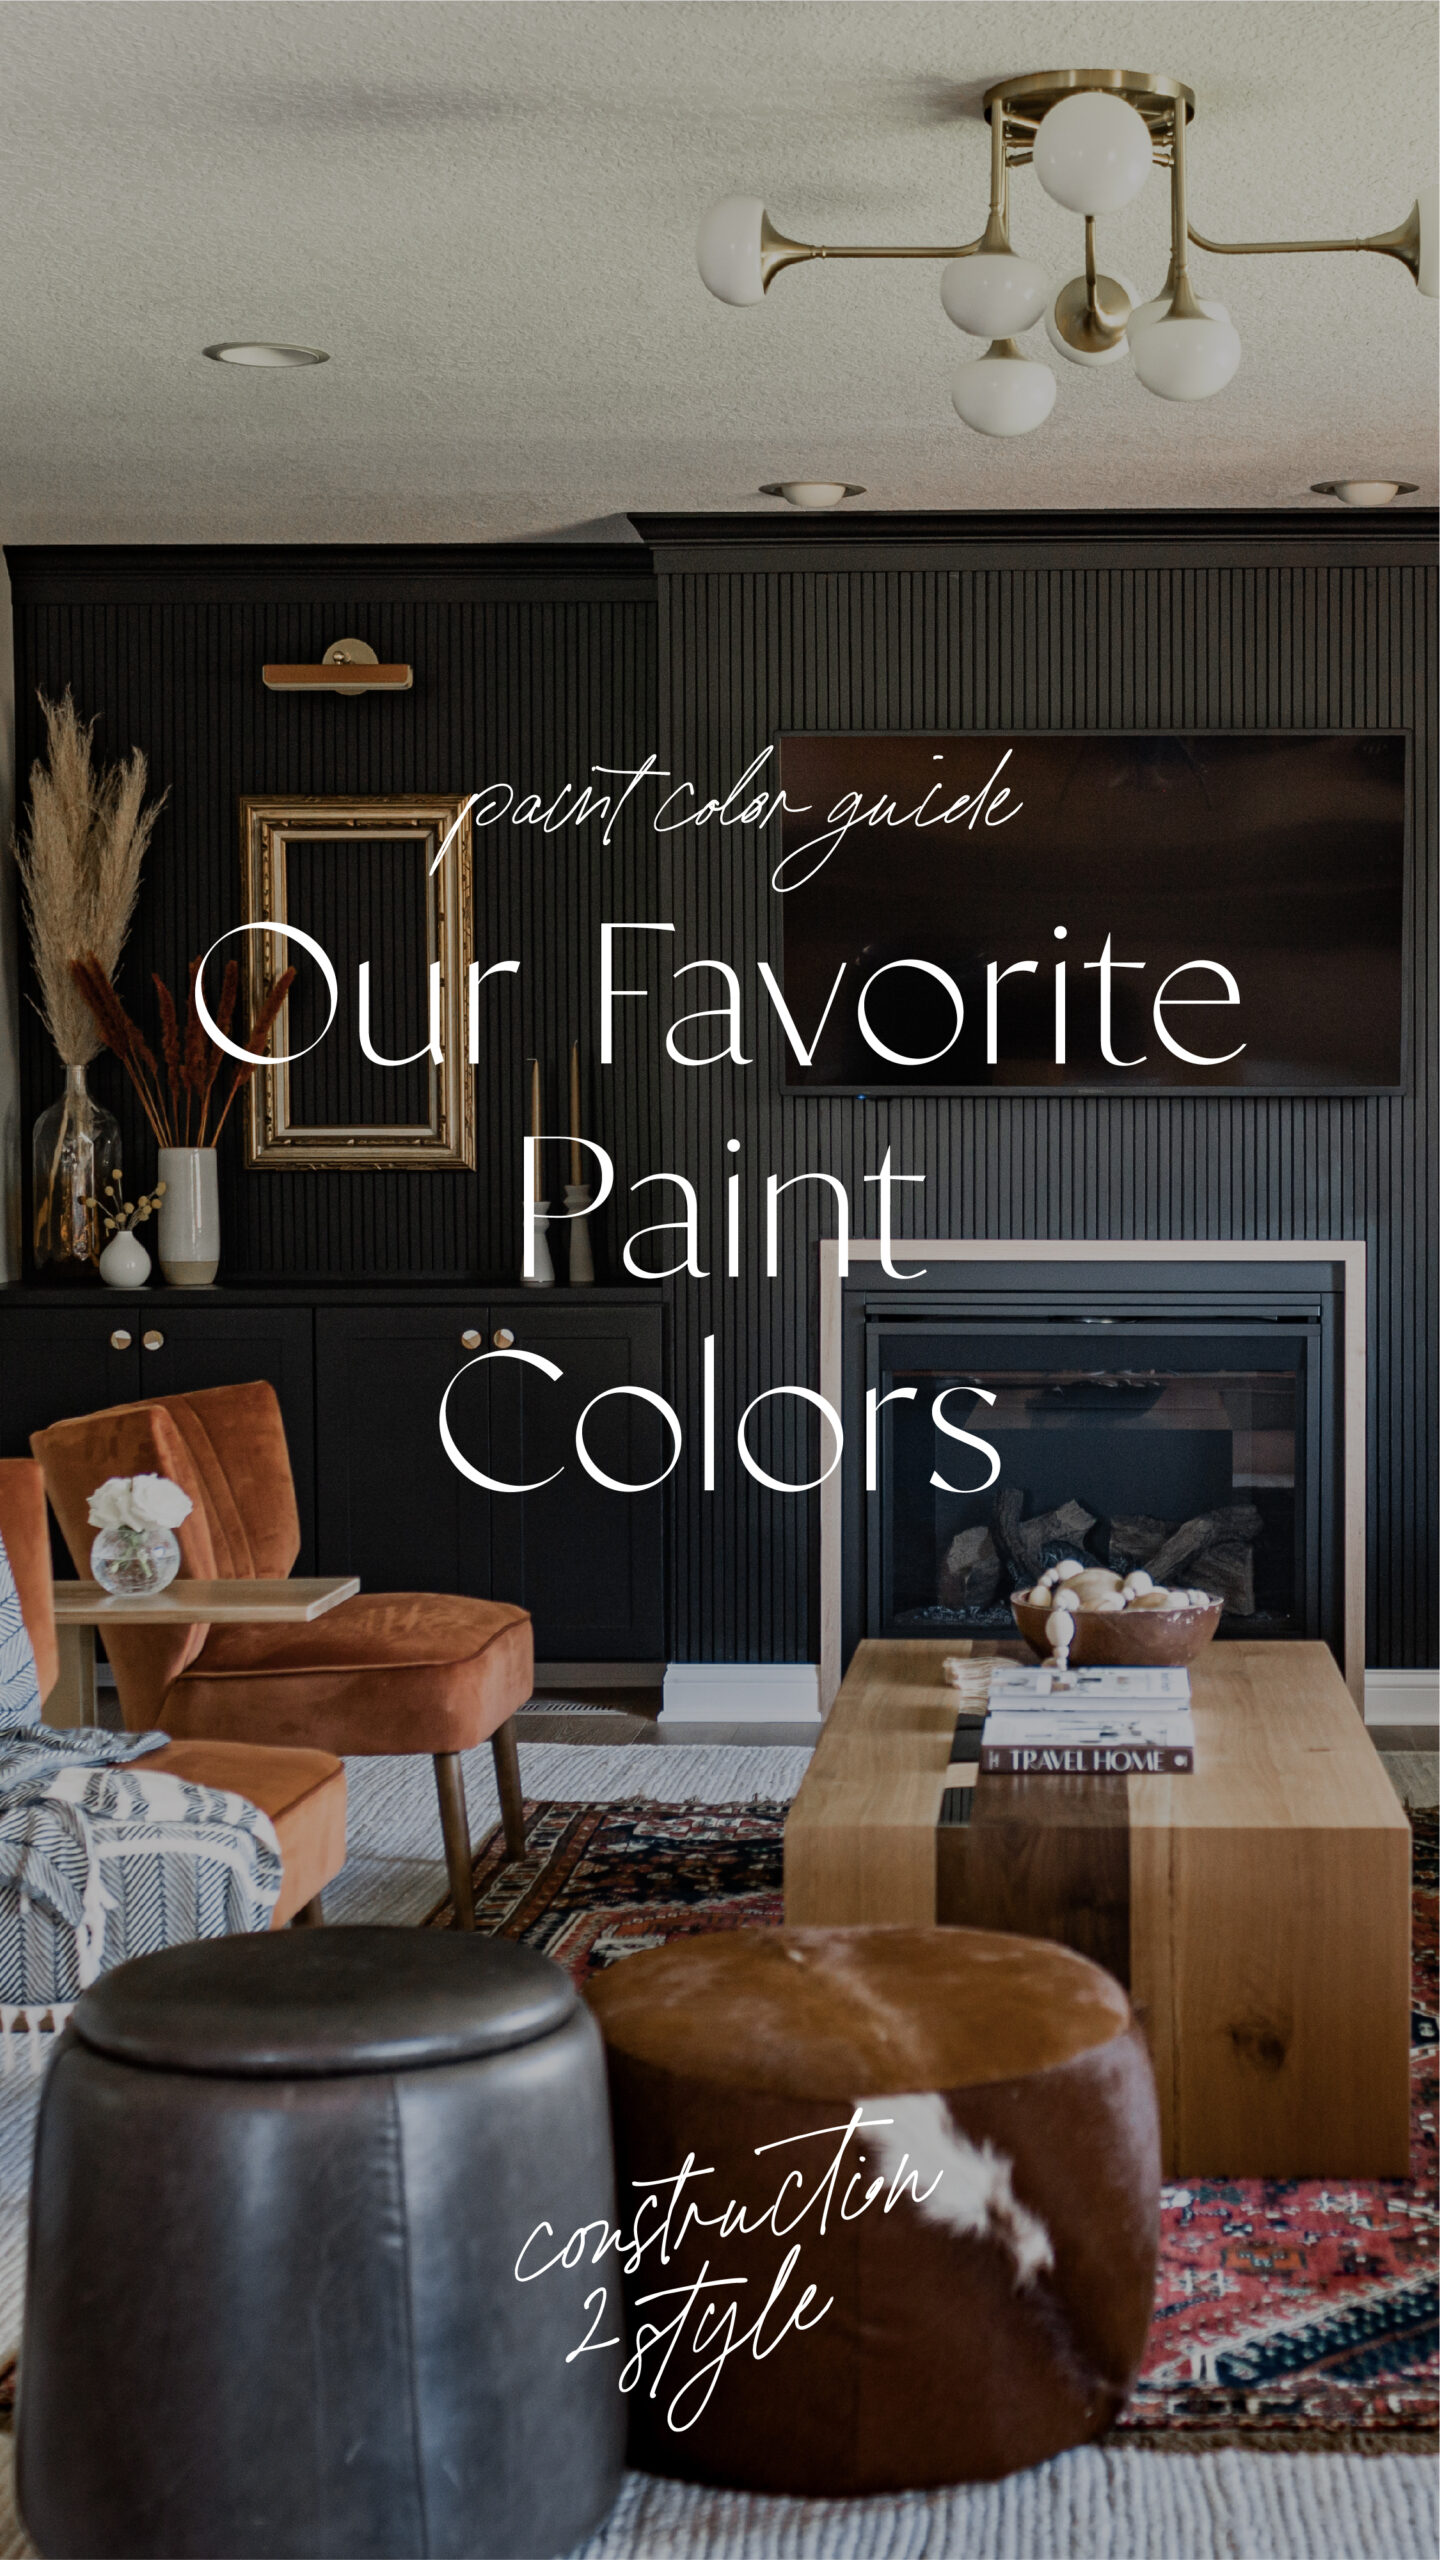 Bold Elegance: Our Top 8 Statement Gray + Black Paint Colors 2